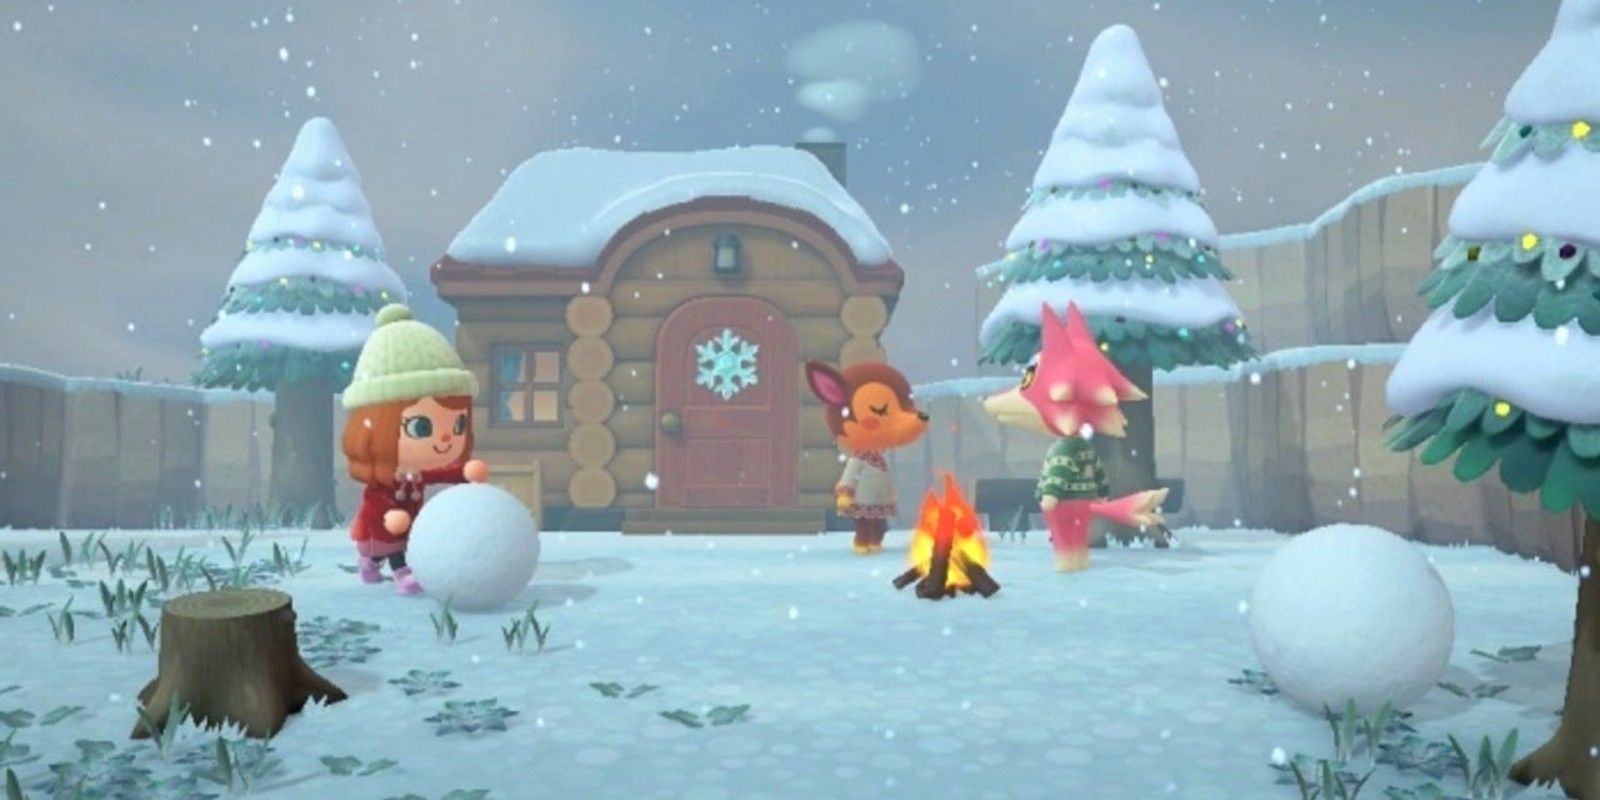 A player rolls a snowball in front of a house while two villagers talk during winter time in Animal Crossing: New Horizons